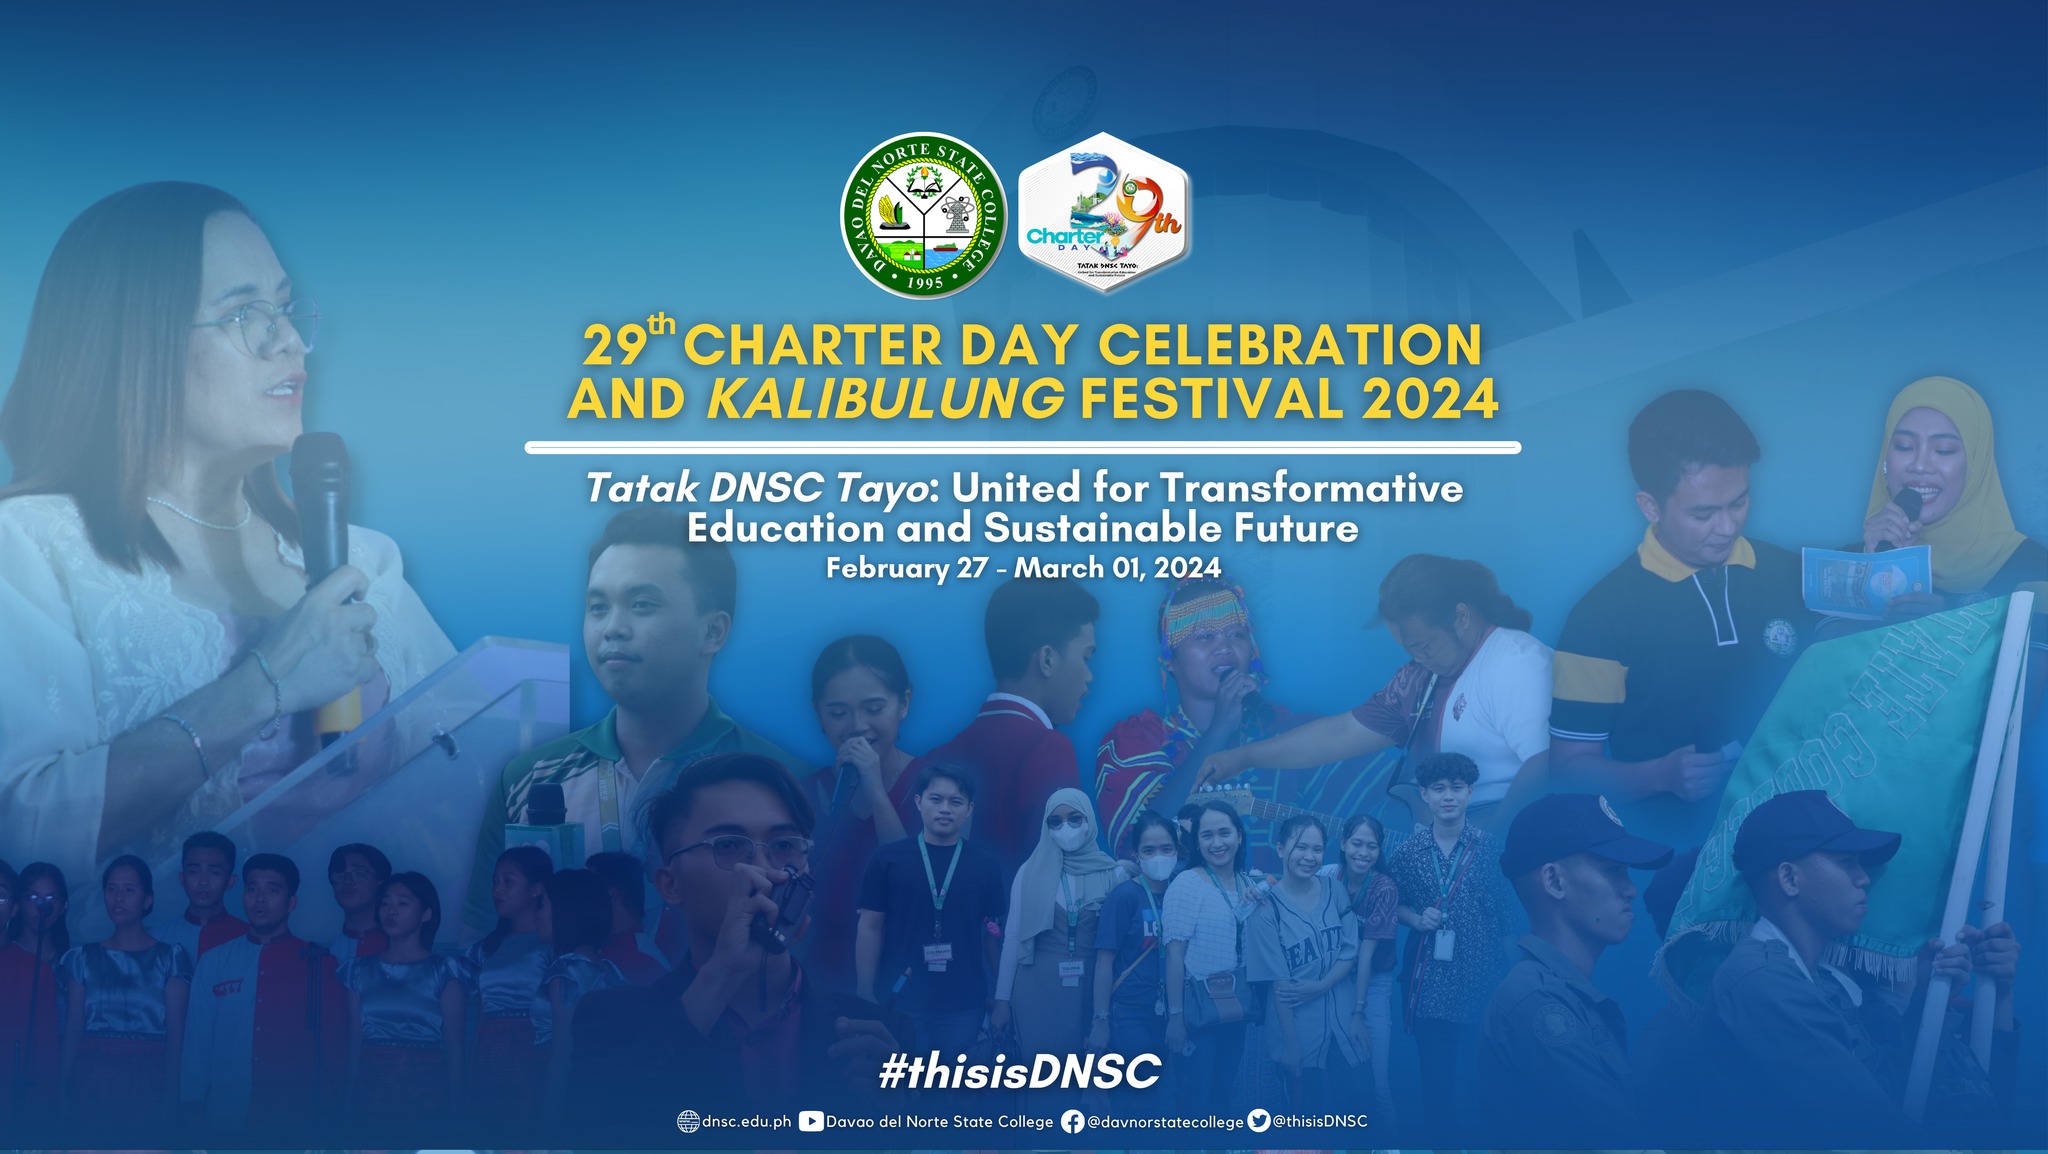 29th Charter Day Celebration and Kalibulung Festival 2024